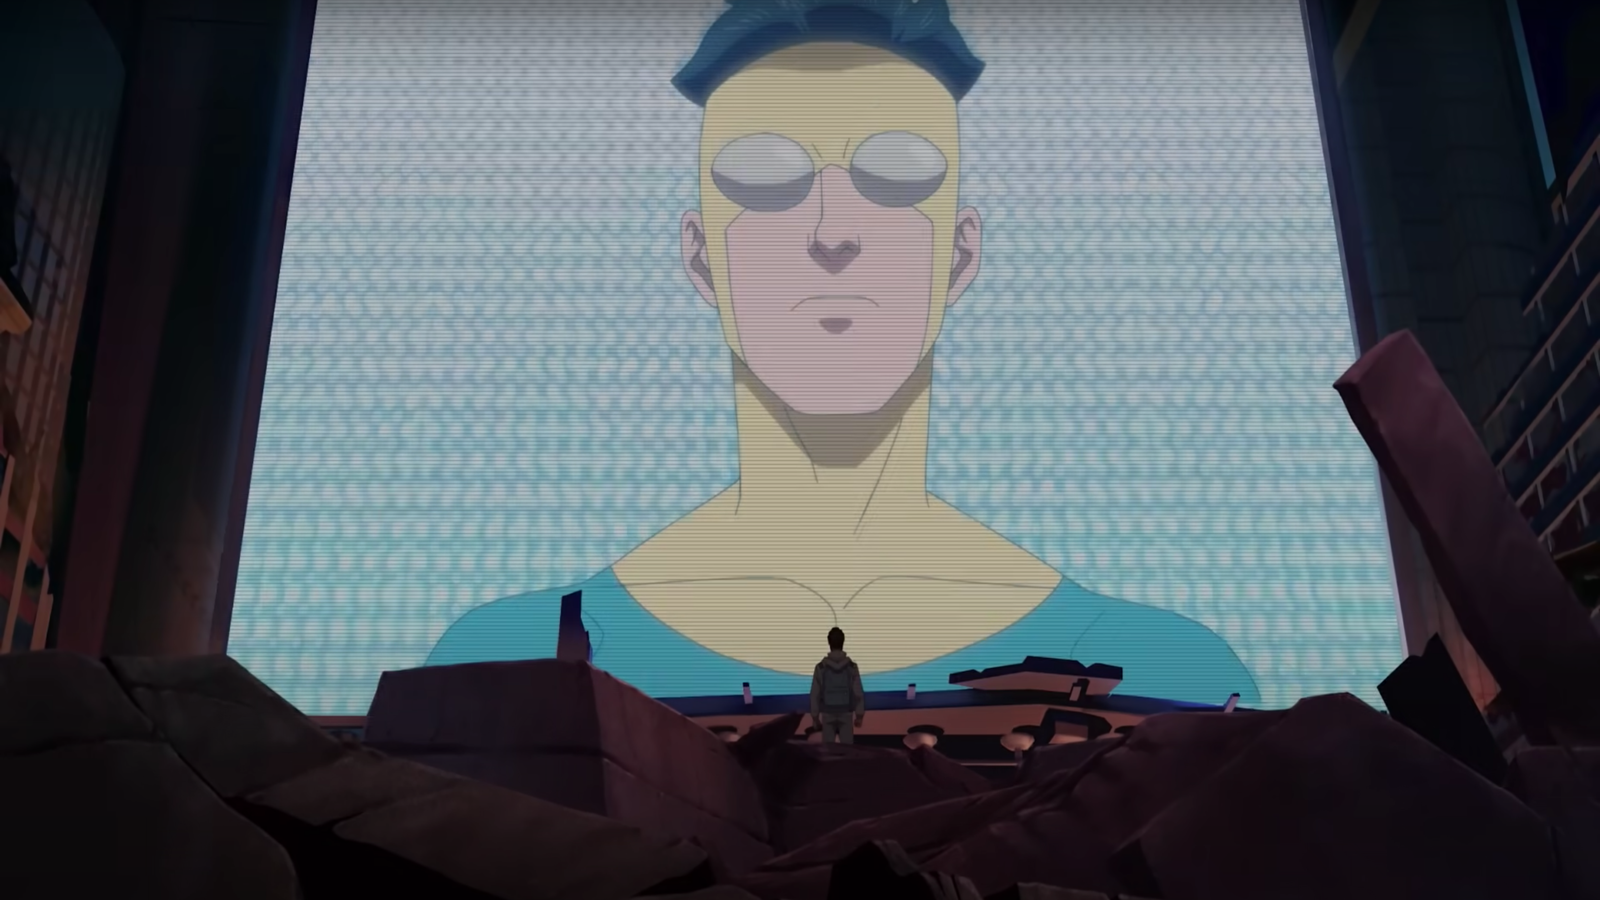 Invincible season 2 release date, teaser and standalone episode out now